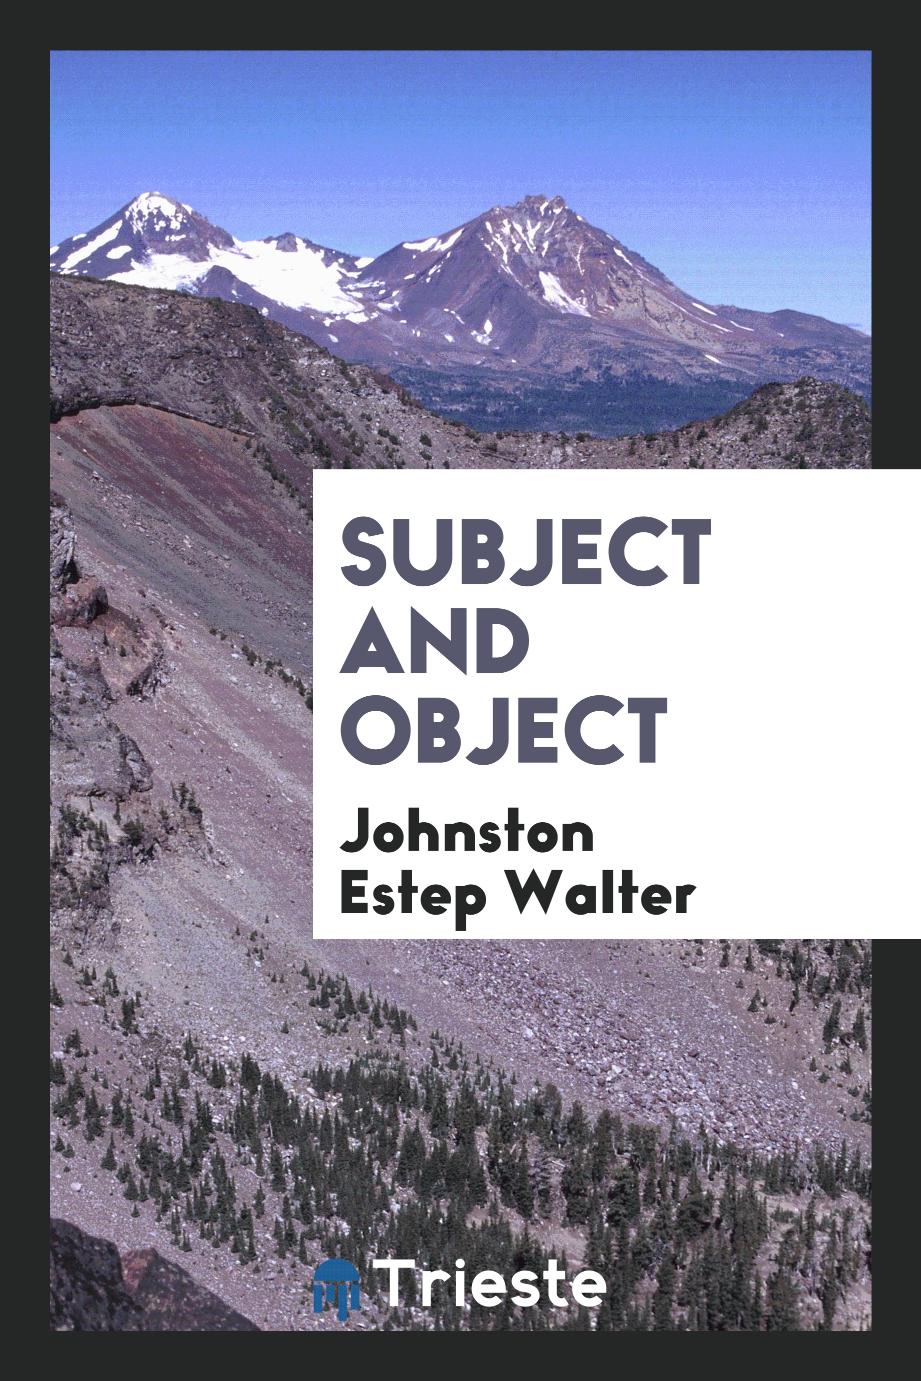 Subject and object